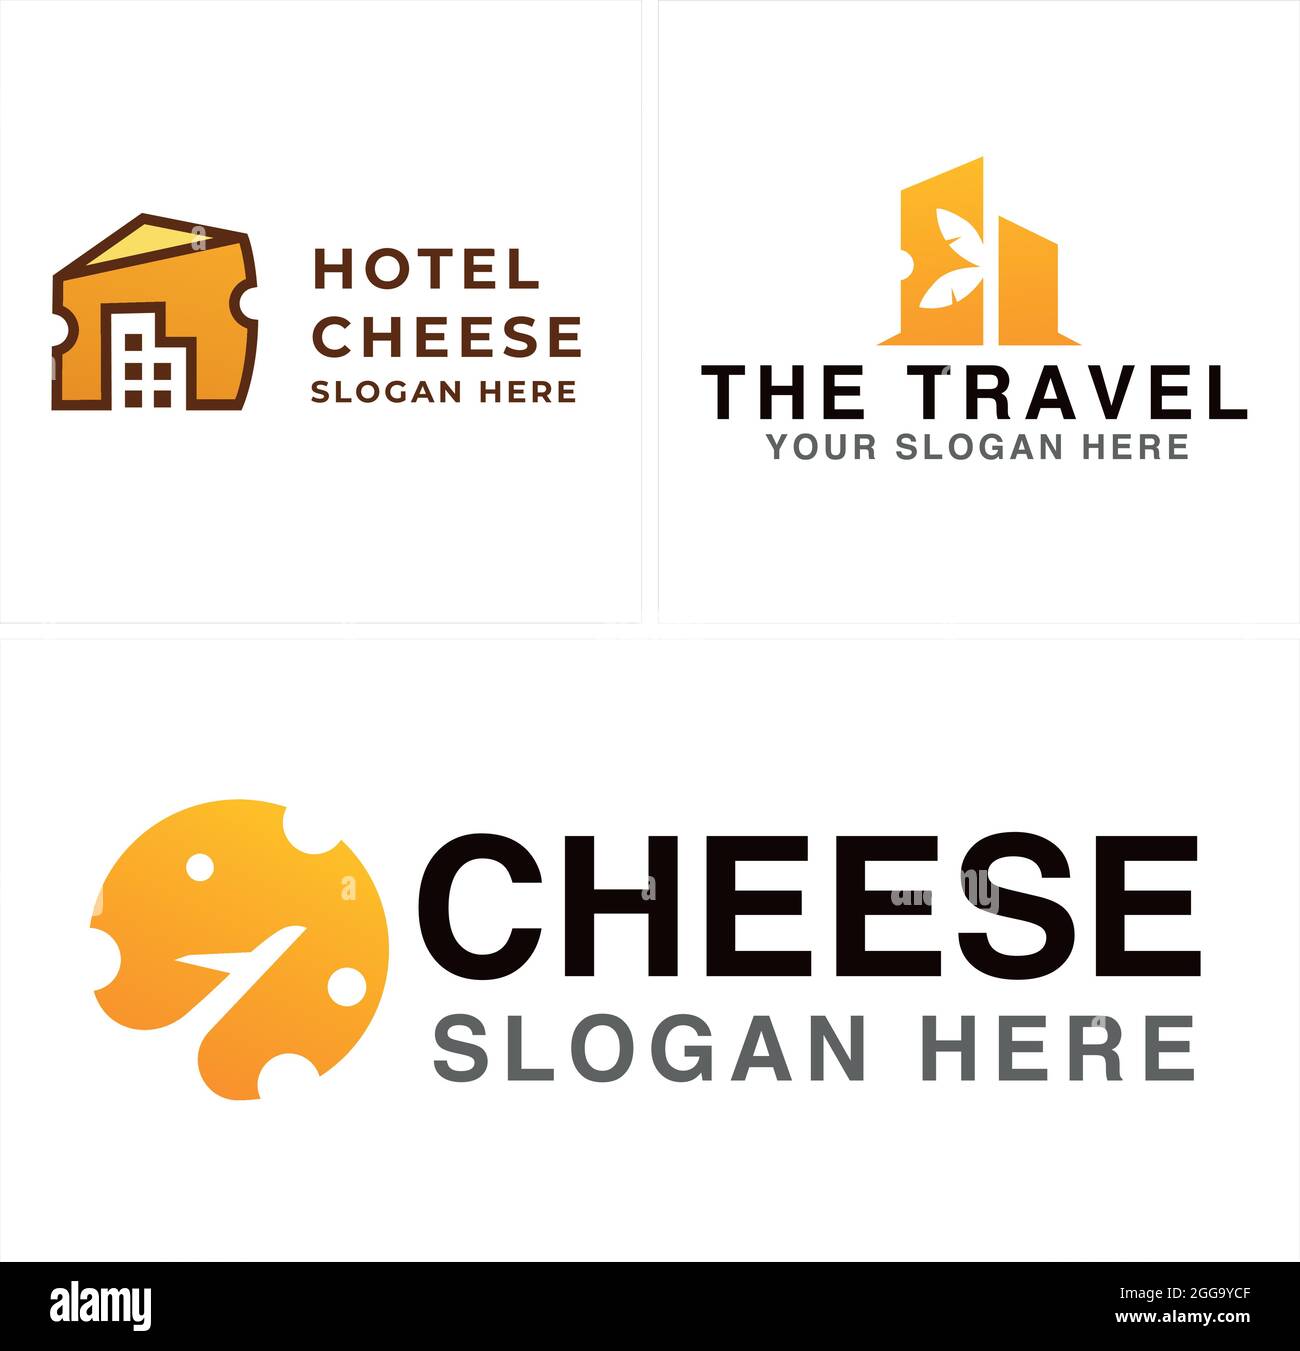 Cheese building and plane combination logo hotel travel Stock Vector